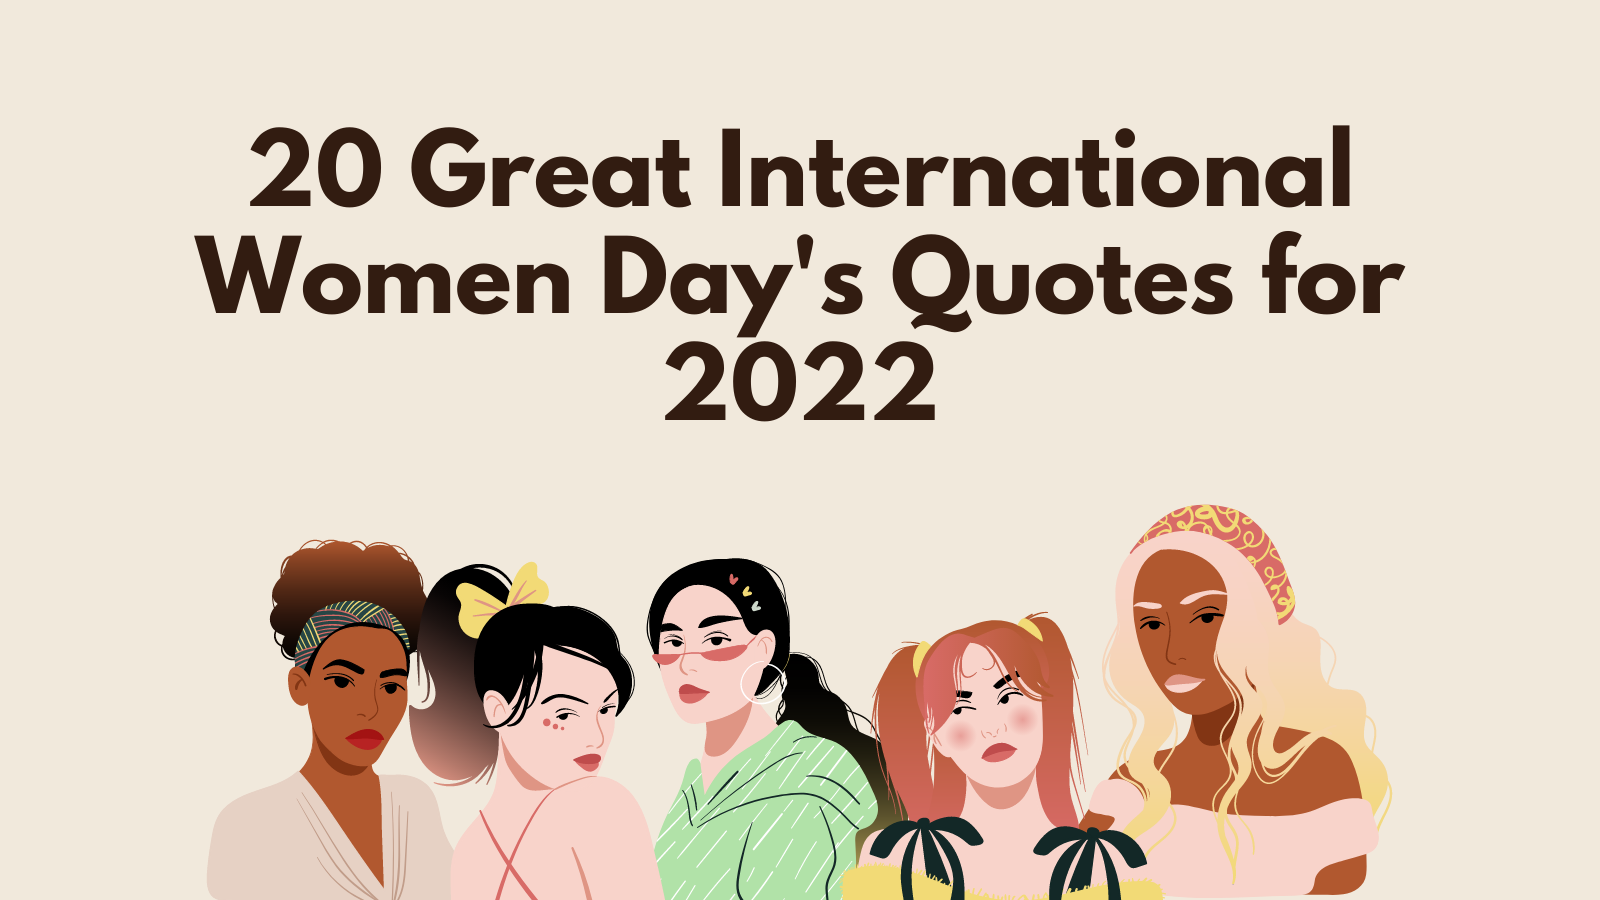 20 Great International Women’s Day Quotes for 2022